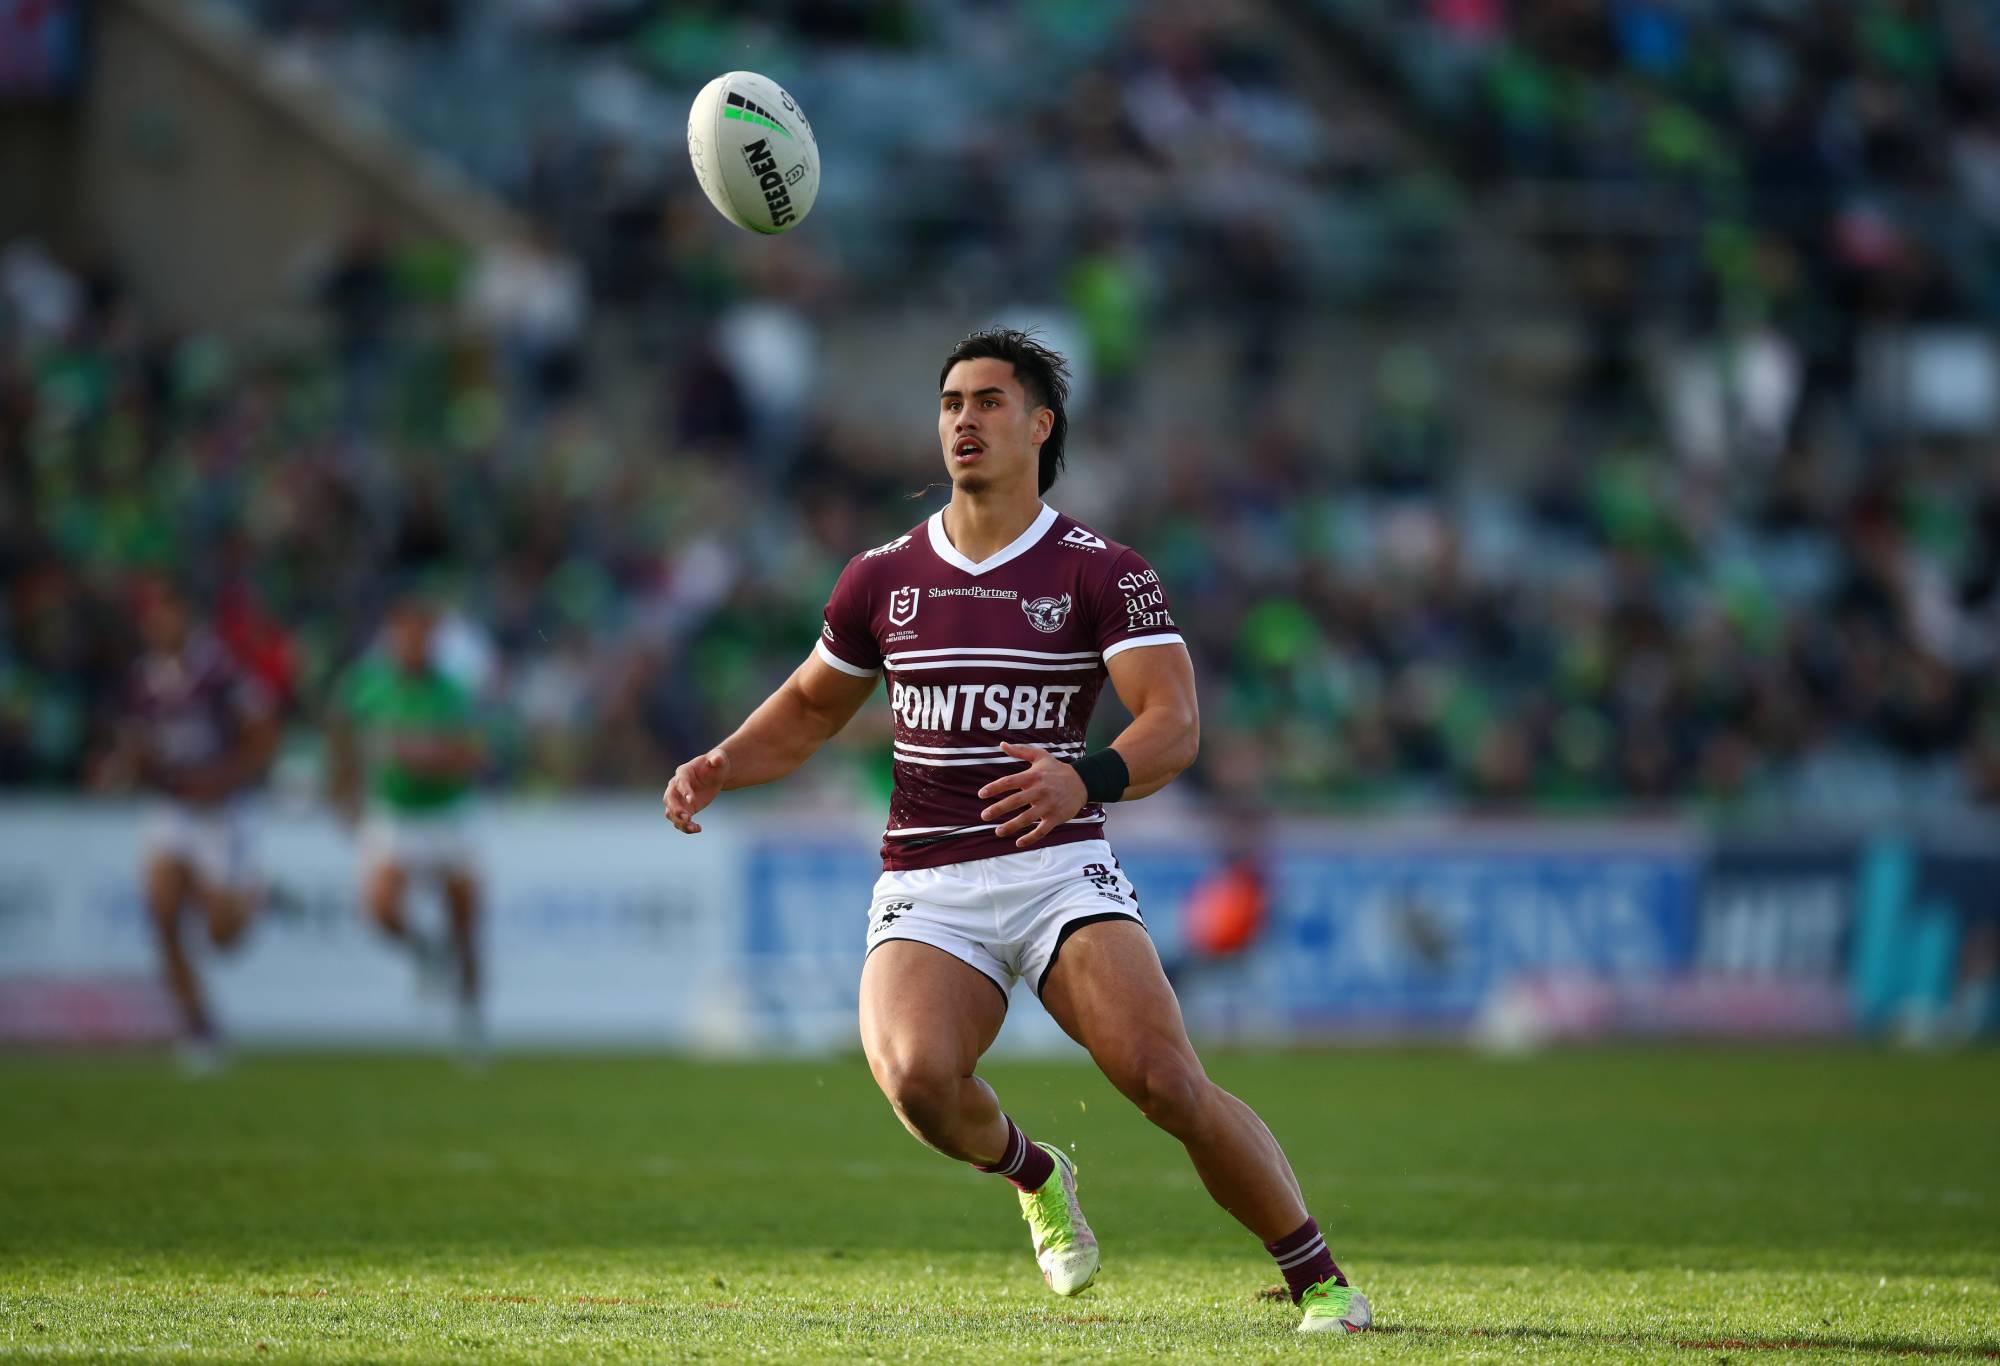 CANBERRA, AUSTRALIA - AUGUST 27: Kaeo Weekes of the Sea Eagles during the round 24 NRL match between the Canberra Raiders and the Manly Sea Eagles at GIO Stadium on August 27, 2022 in Canberra, Australia. (Photo by Jason McCawley/Getty Images)